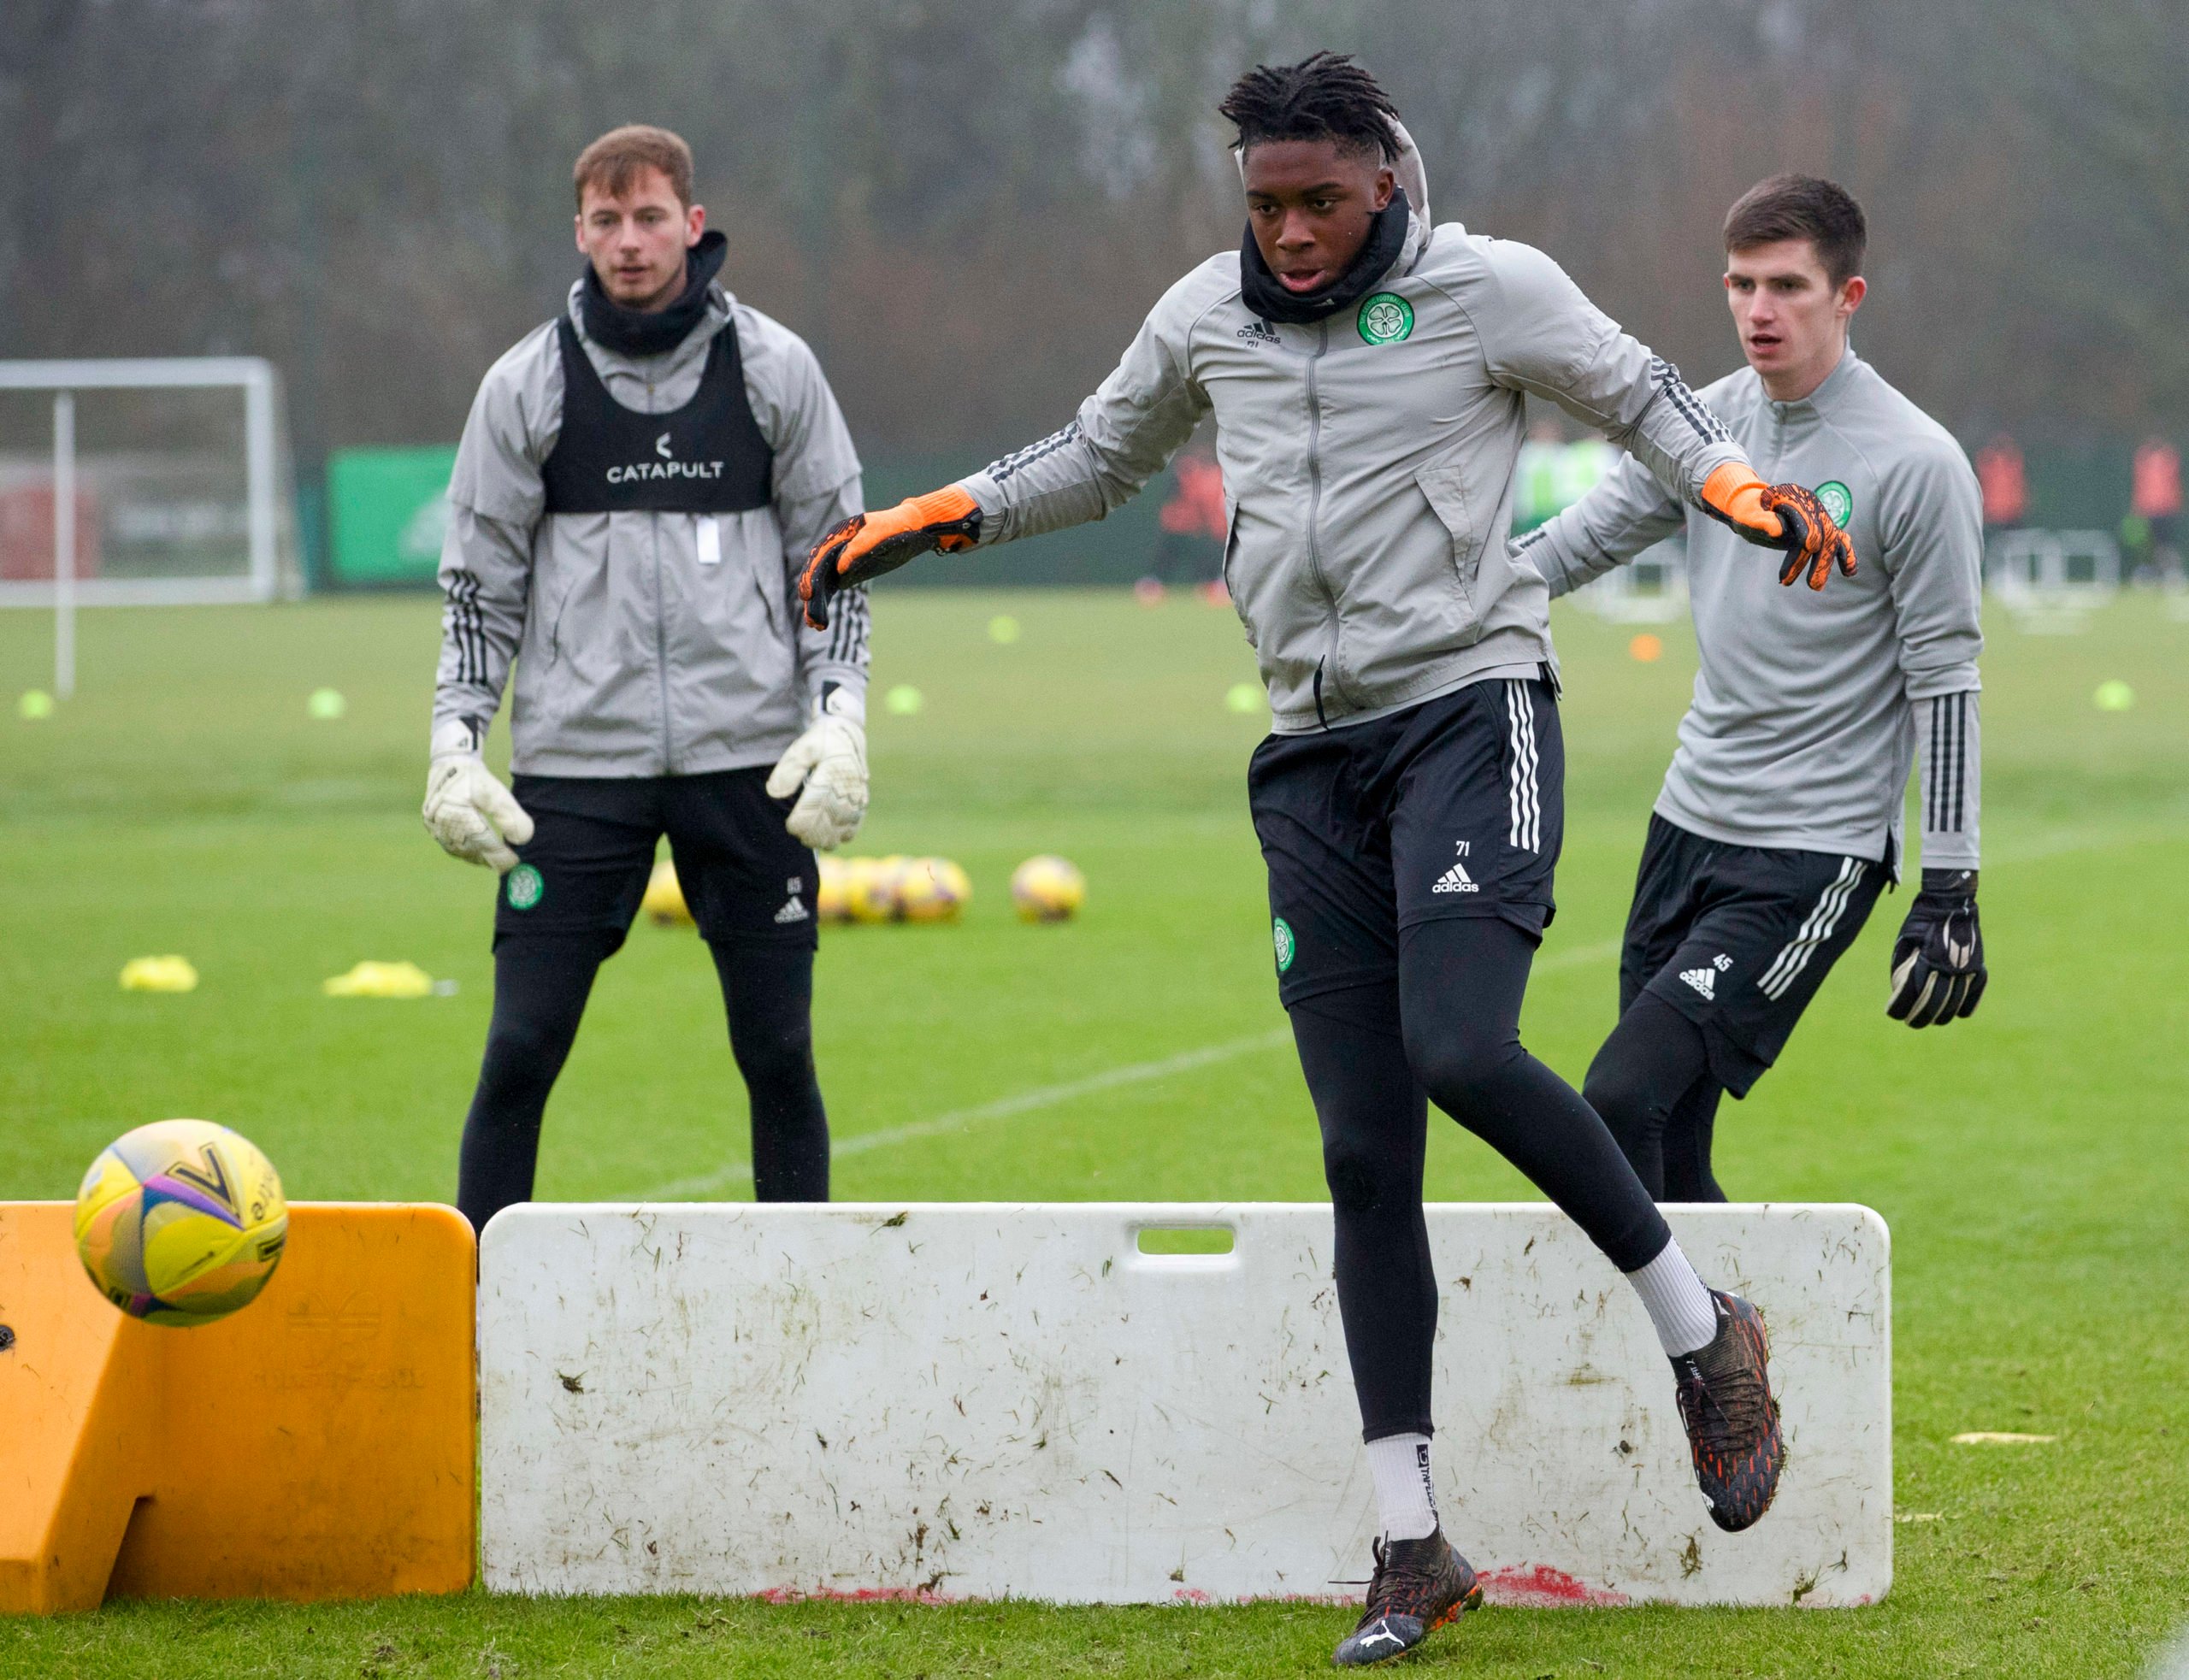 Report: Lennoxtown youth has caught the eye of senior Celtic players in training